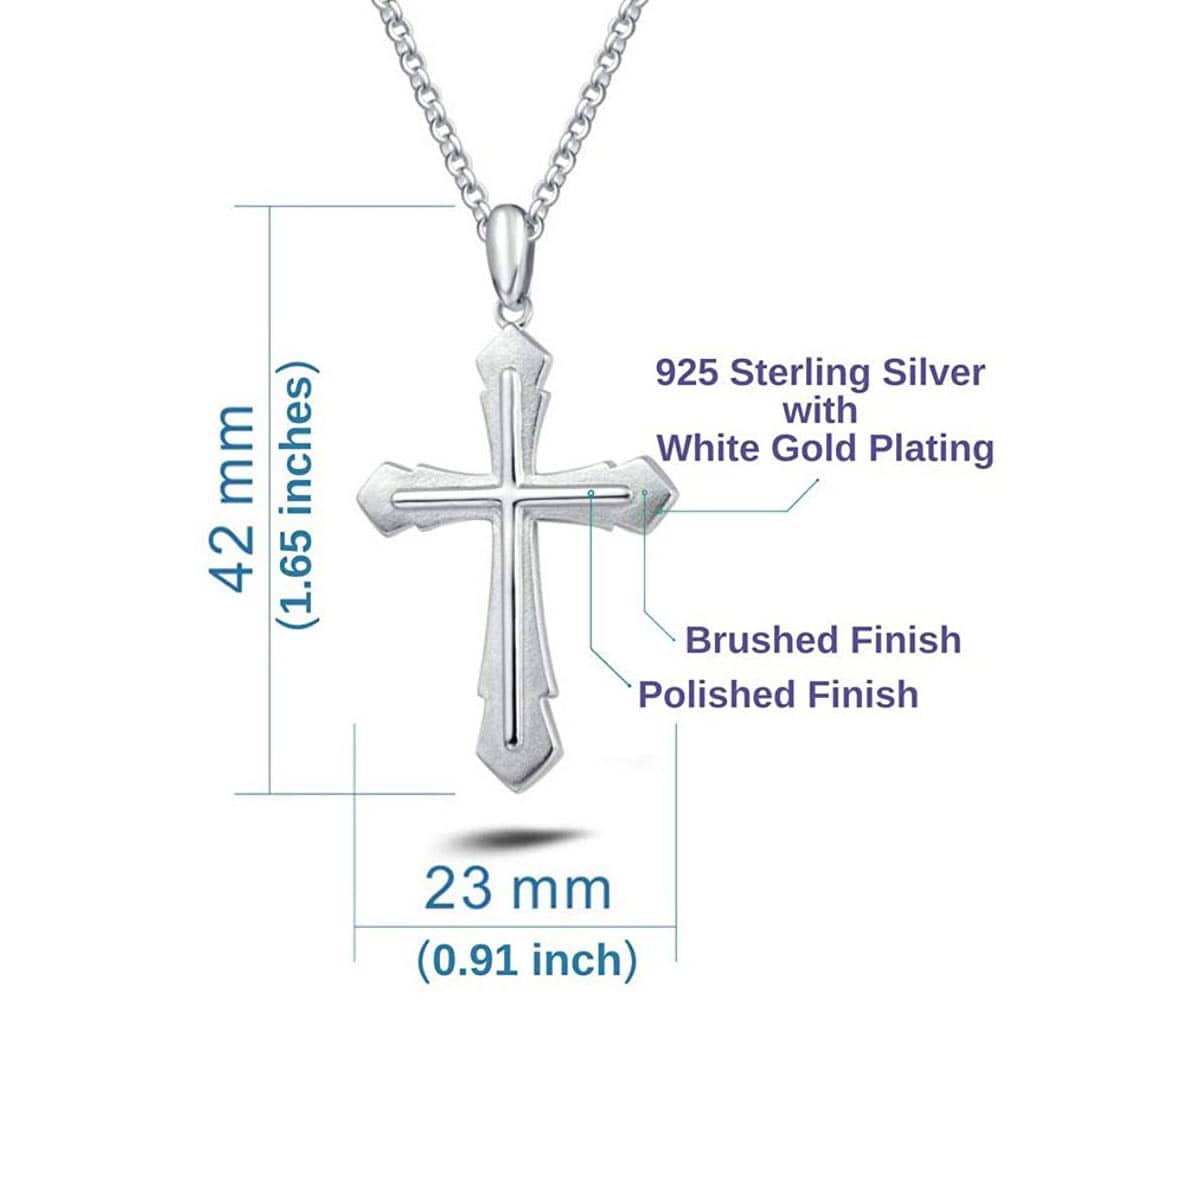 FANCIME Edgy Men's Cross Sterling Silver Necklace Size